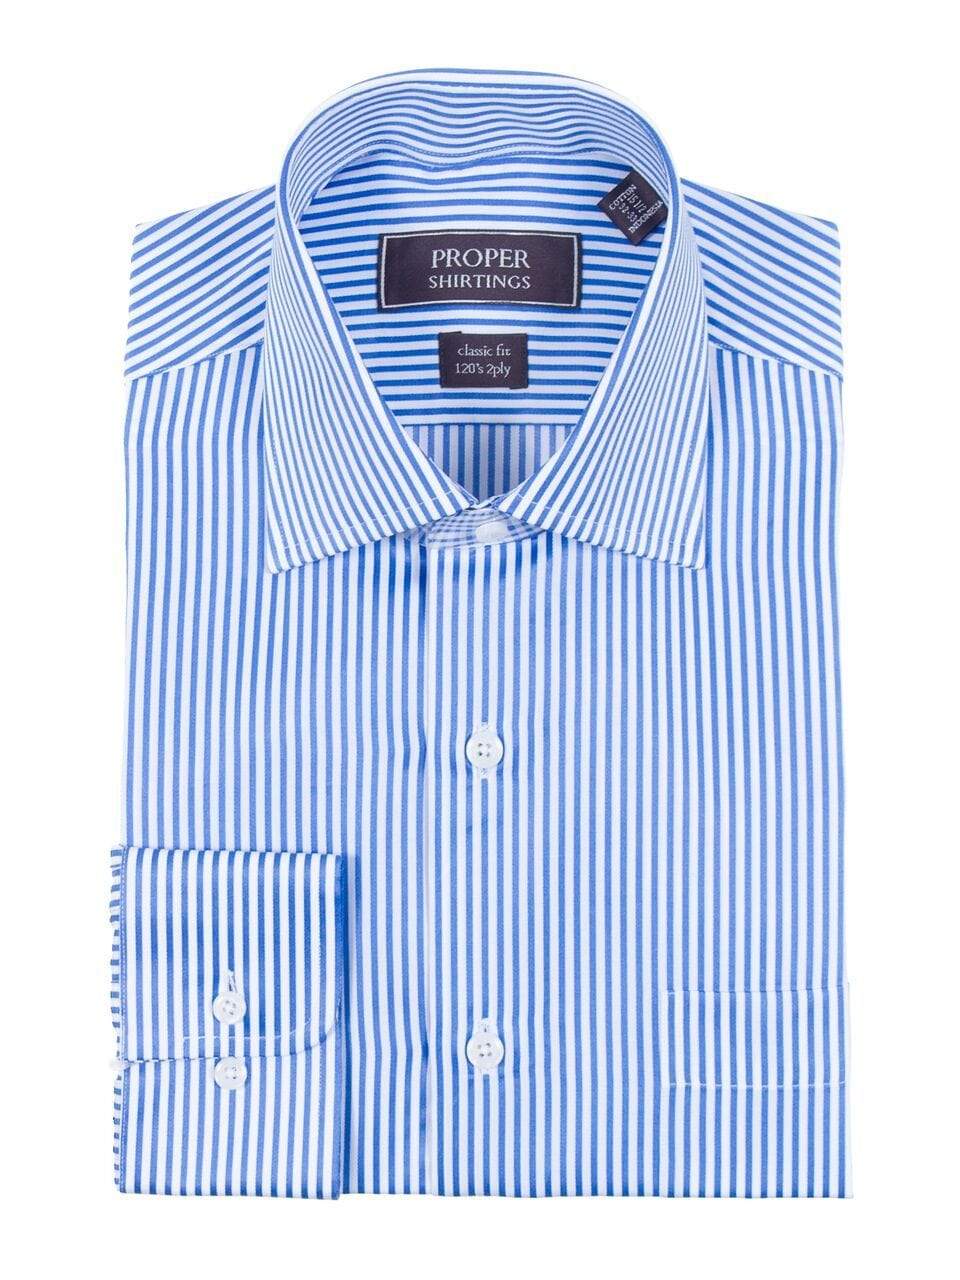 Proper Shirtings SHIRTS 16 1/2 36/37 Mens Classic Fit White And Blue Striped 120's 2PLY Cotton Dress Shirt